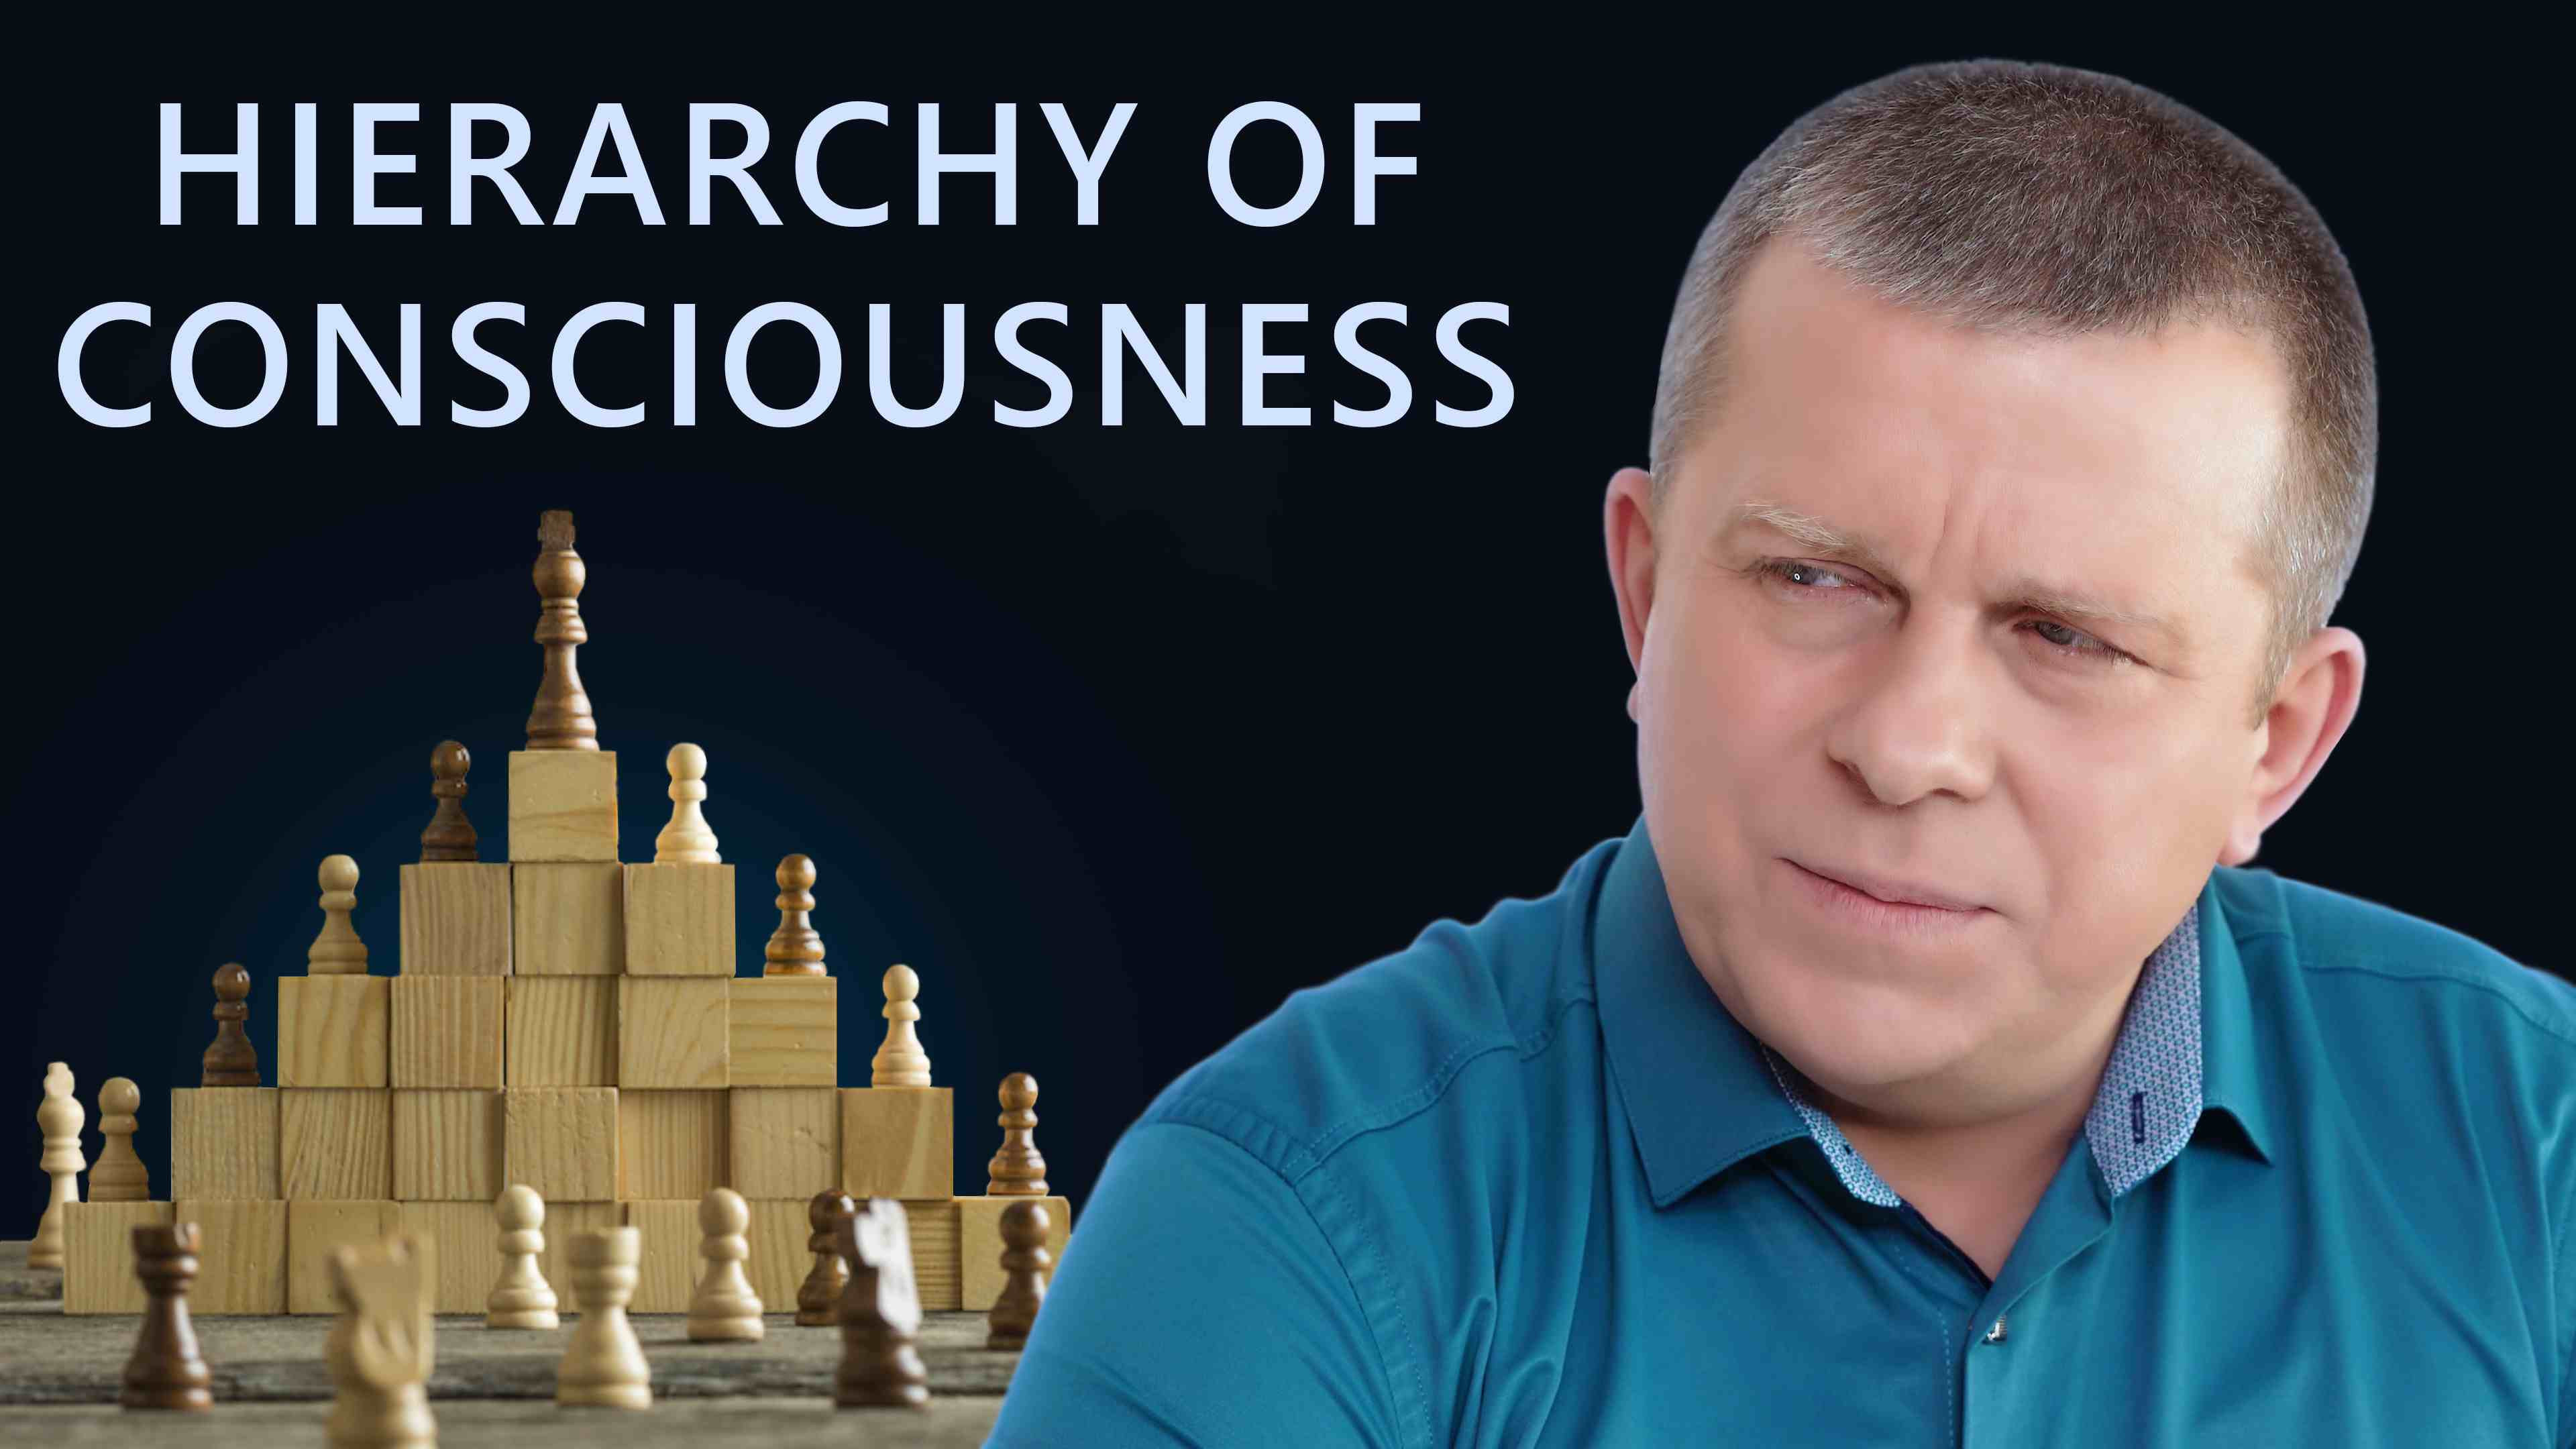 Hierarchy of Consciousness